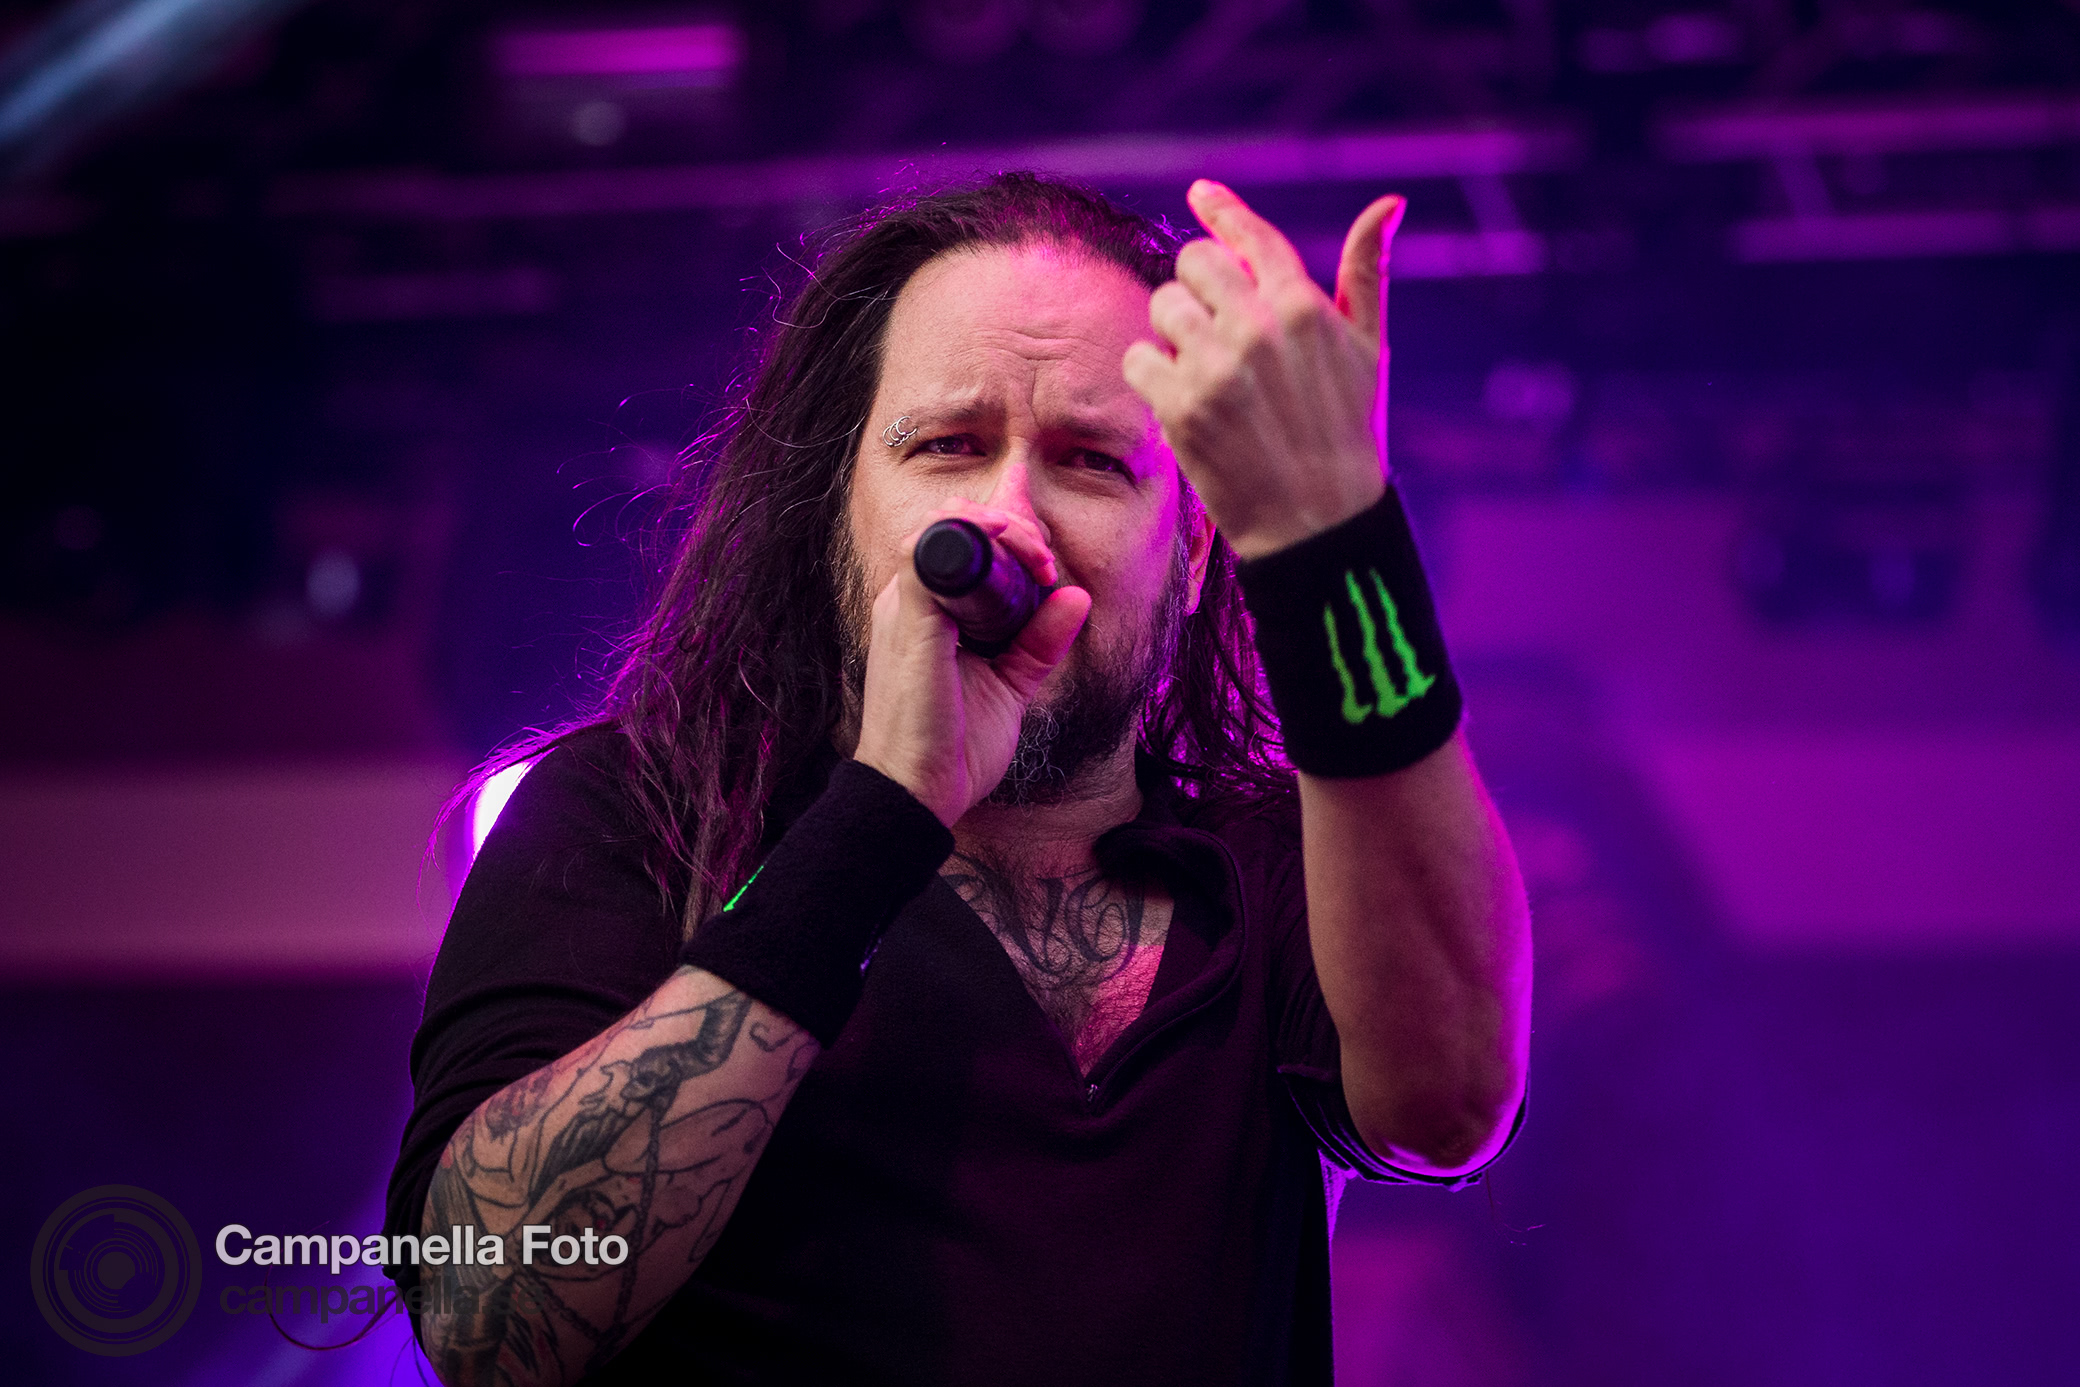 Korn performs in Stockholm - Michael Campanella Photography